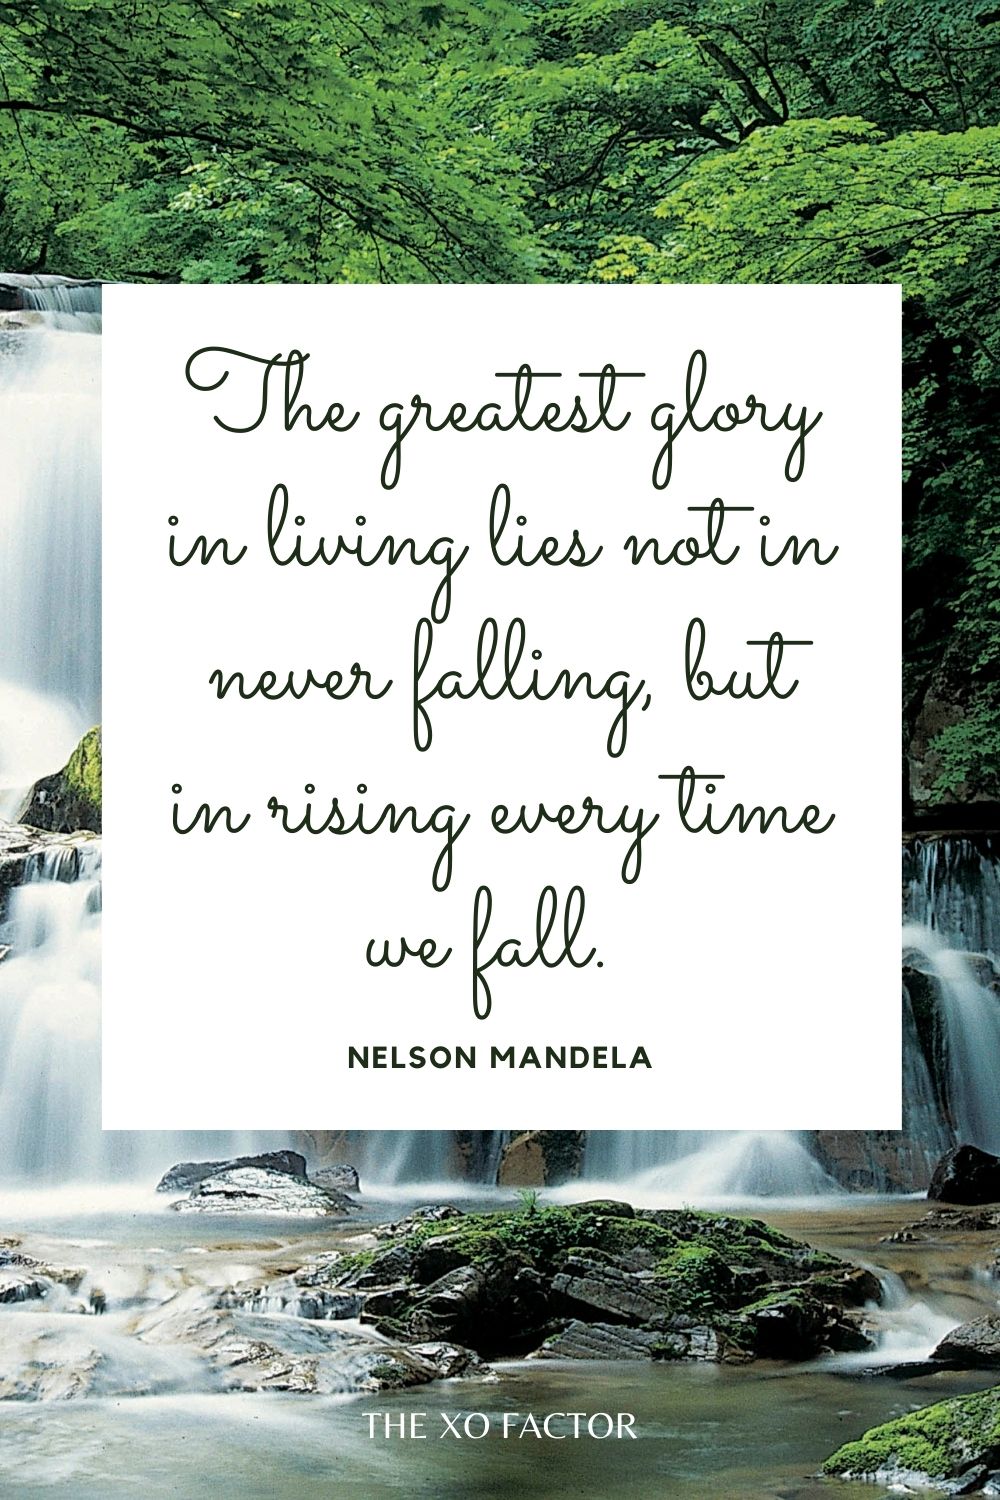 The greatest glory in living lies not in never falling, but in rising every time we fall.  Nelson Mandela